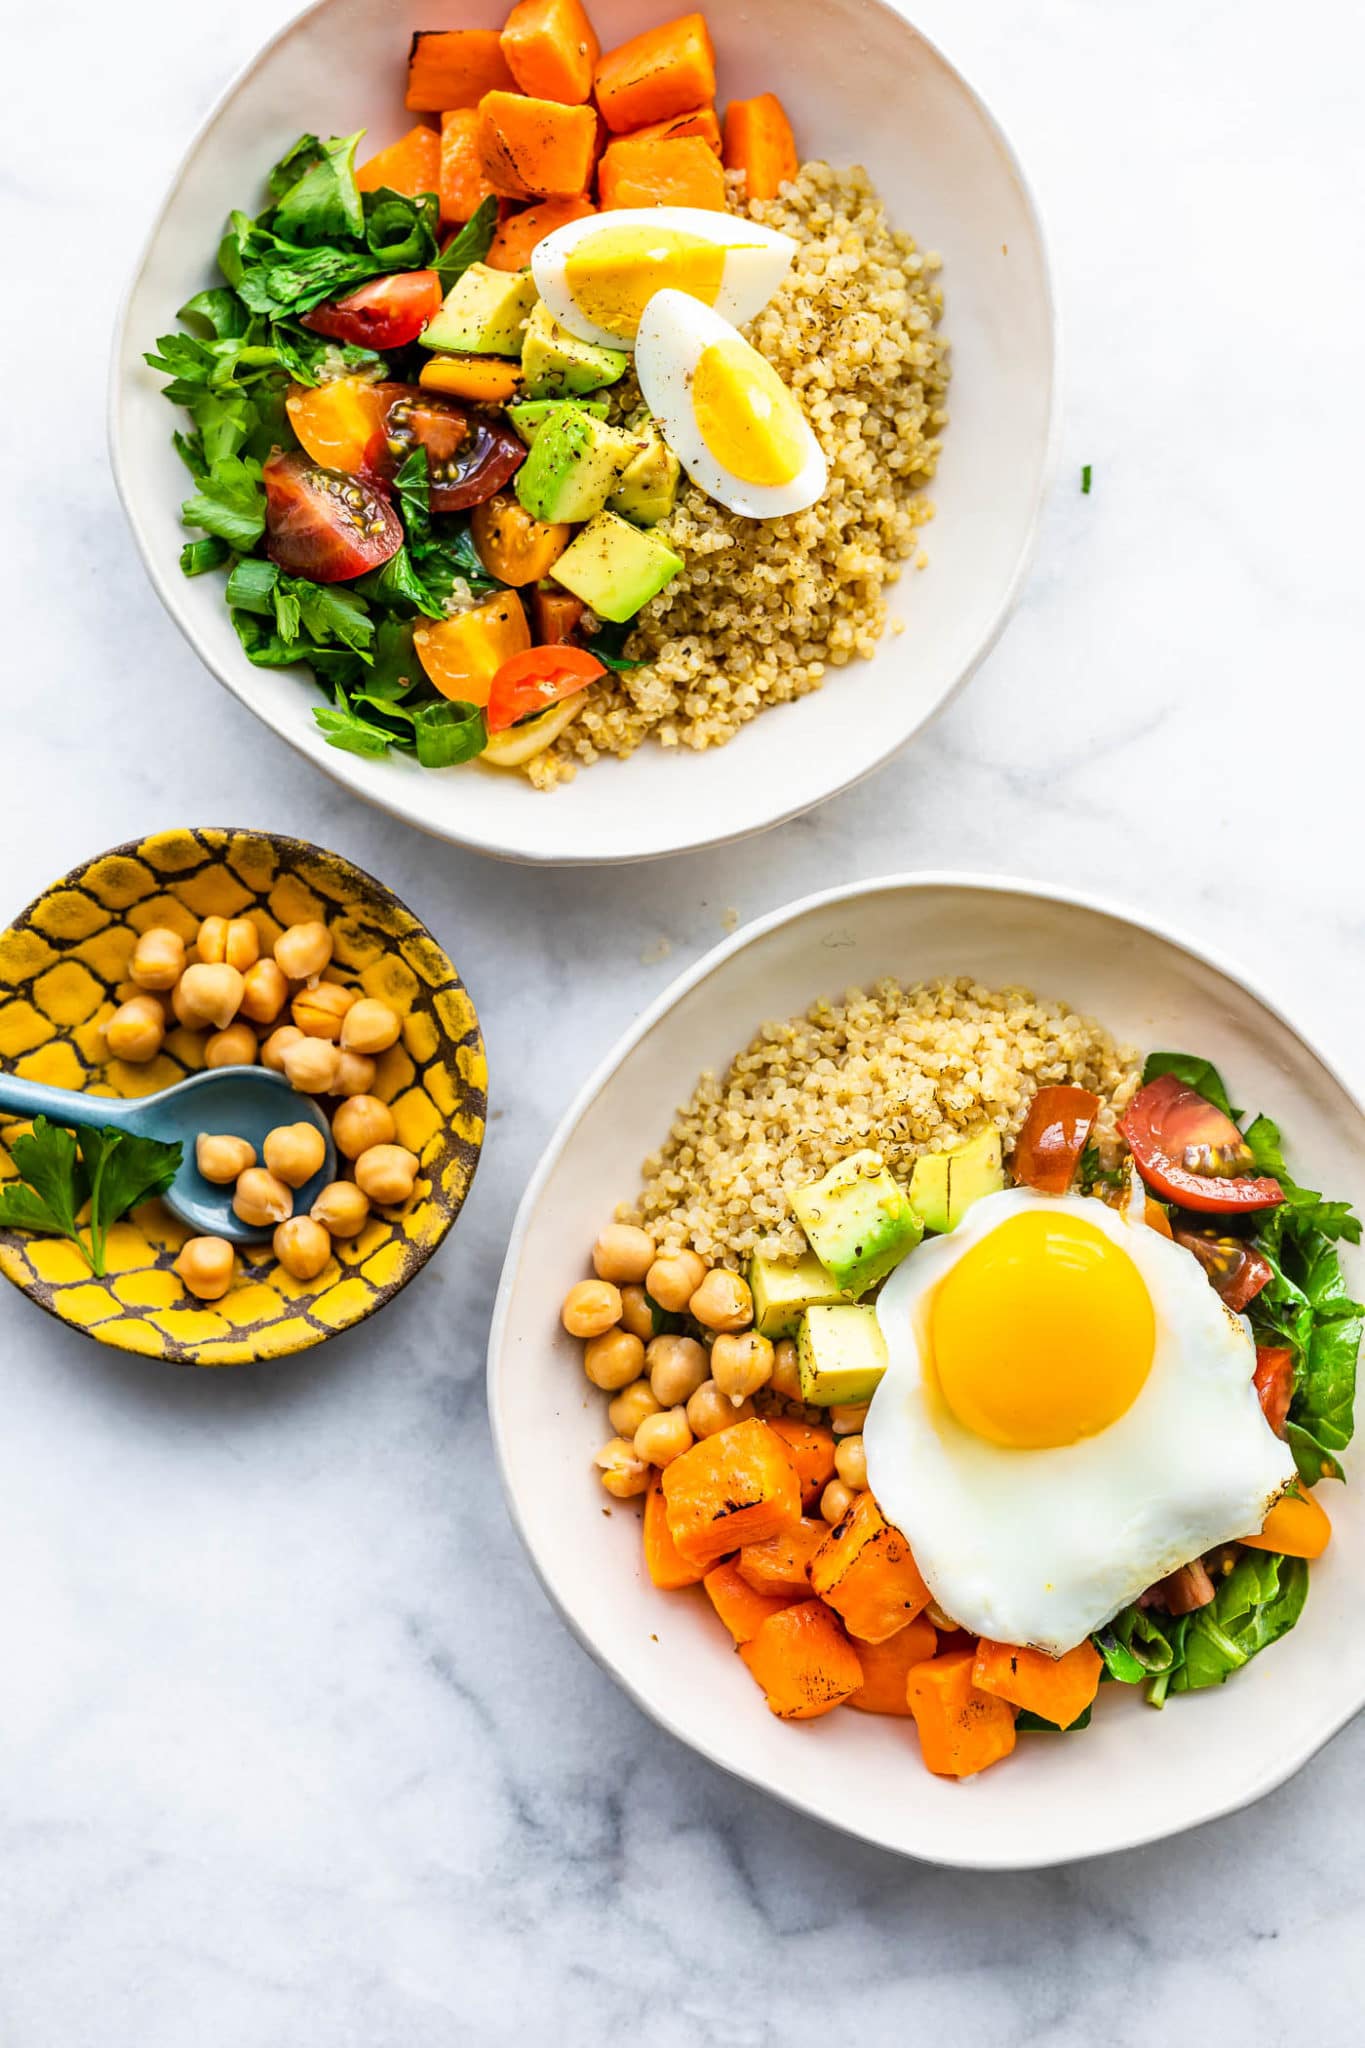 two savory quinoa breakfast bowls one containing quinoa, sweet potatoes, tomatoes, spinach, avocado, and a boiled egg the other containing quinoa, chickpeas, sweet potato, tomatoes, spinach, and a fried egg, and a small bowl with chickpeas on the side